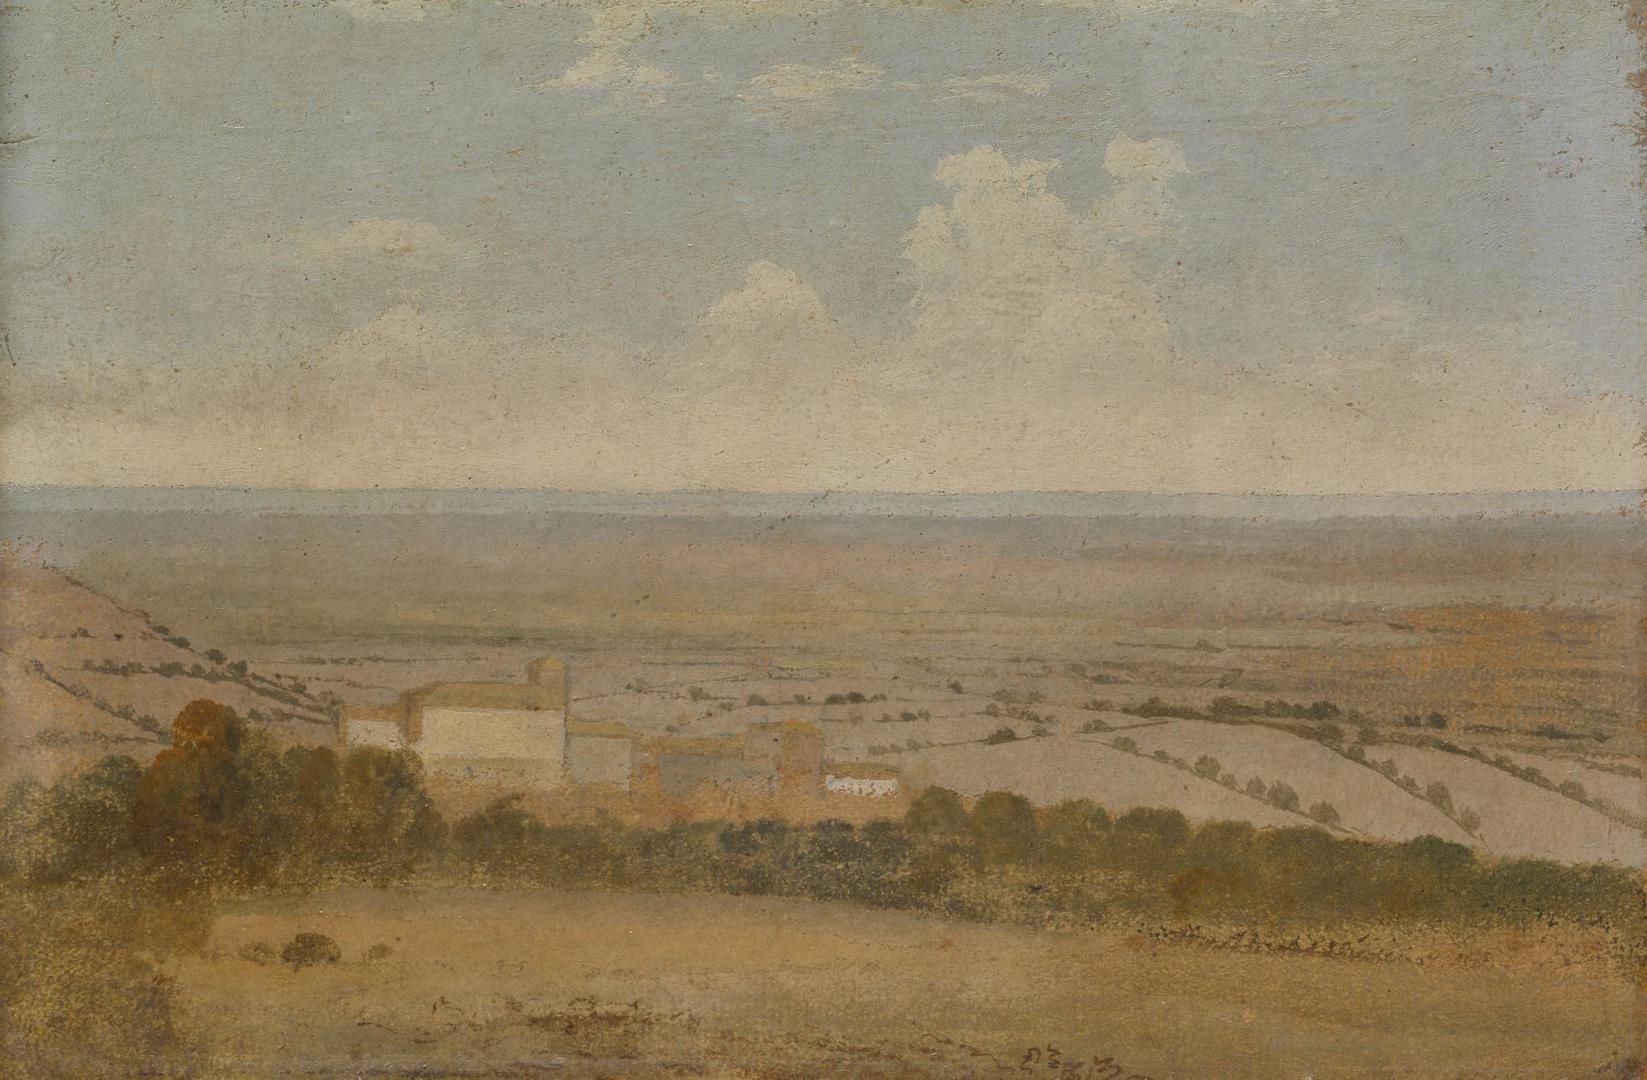 Landscape with a Distant View of the Sea (Italy) by Thomas Jones